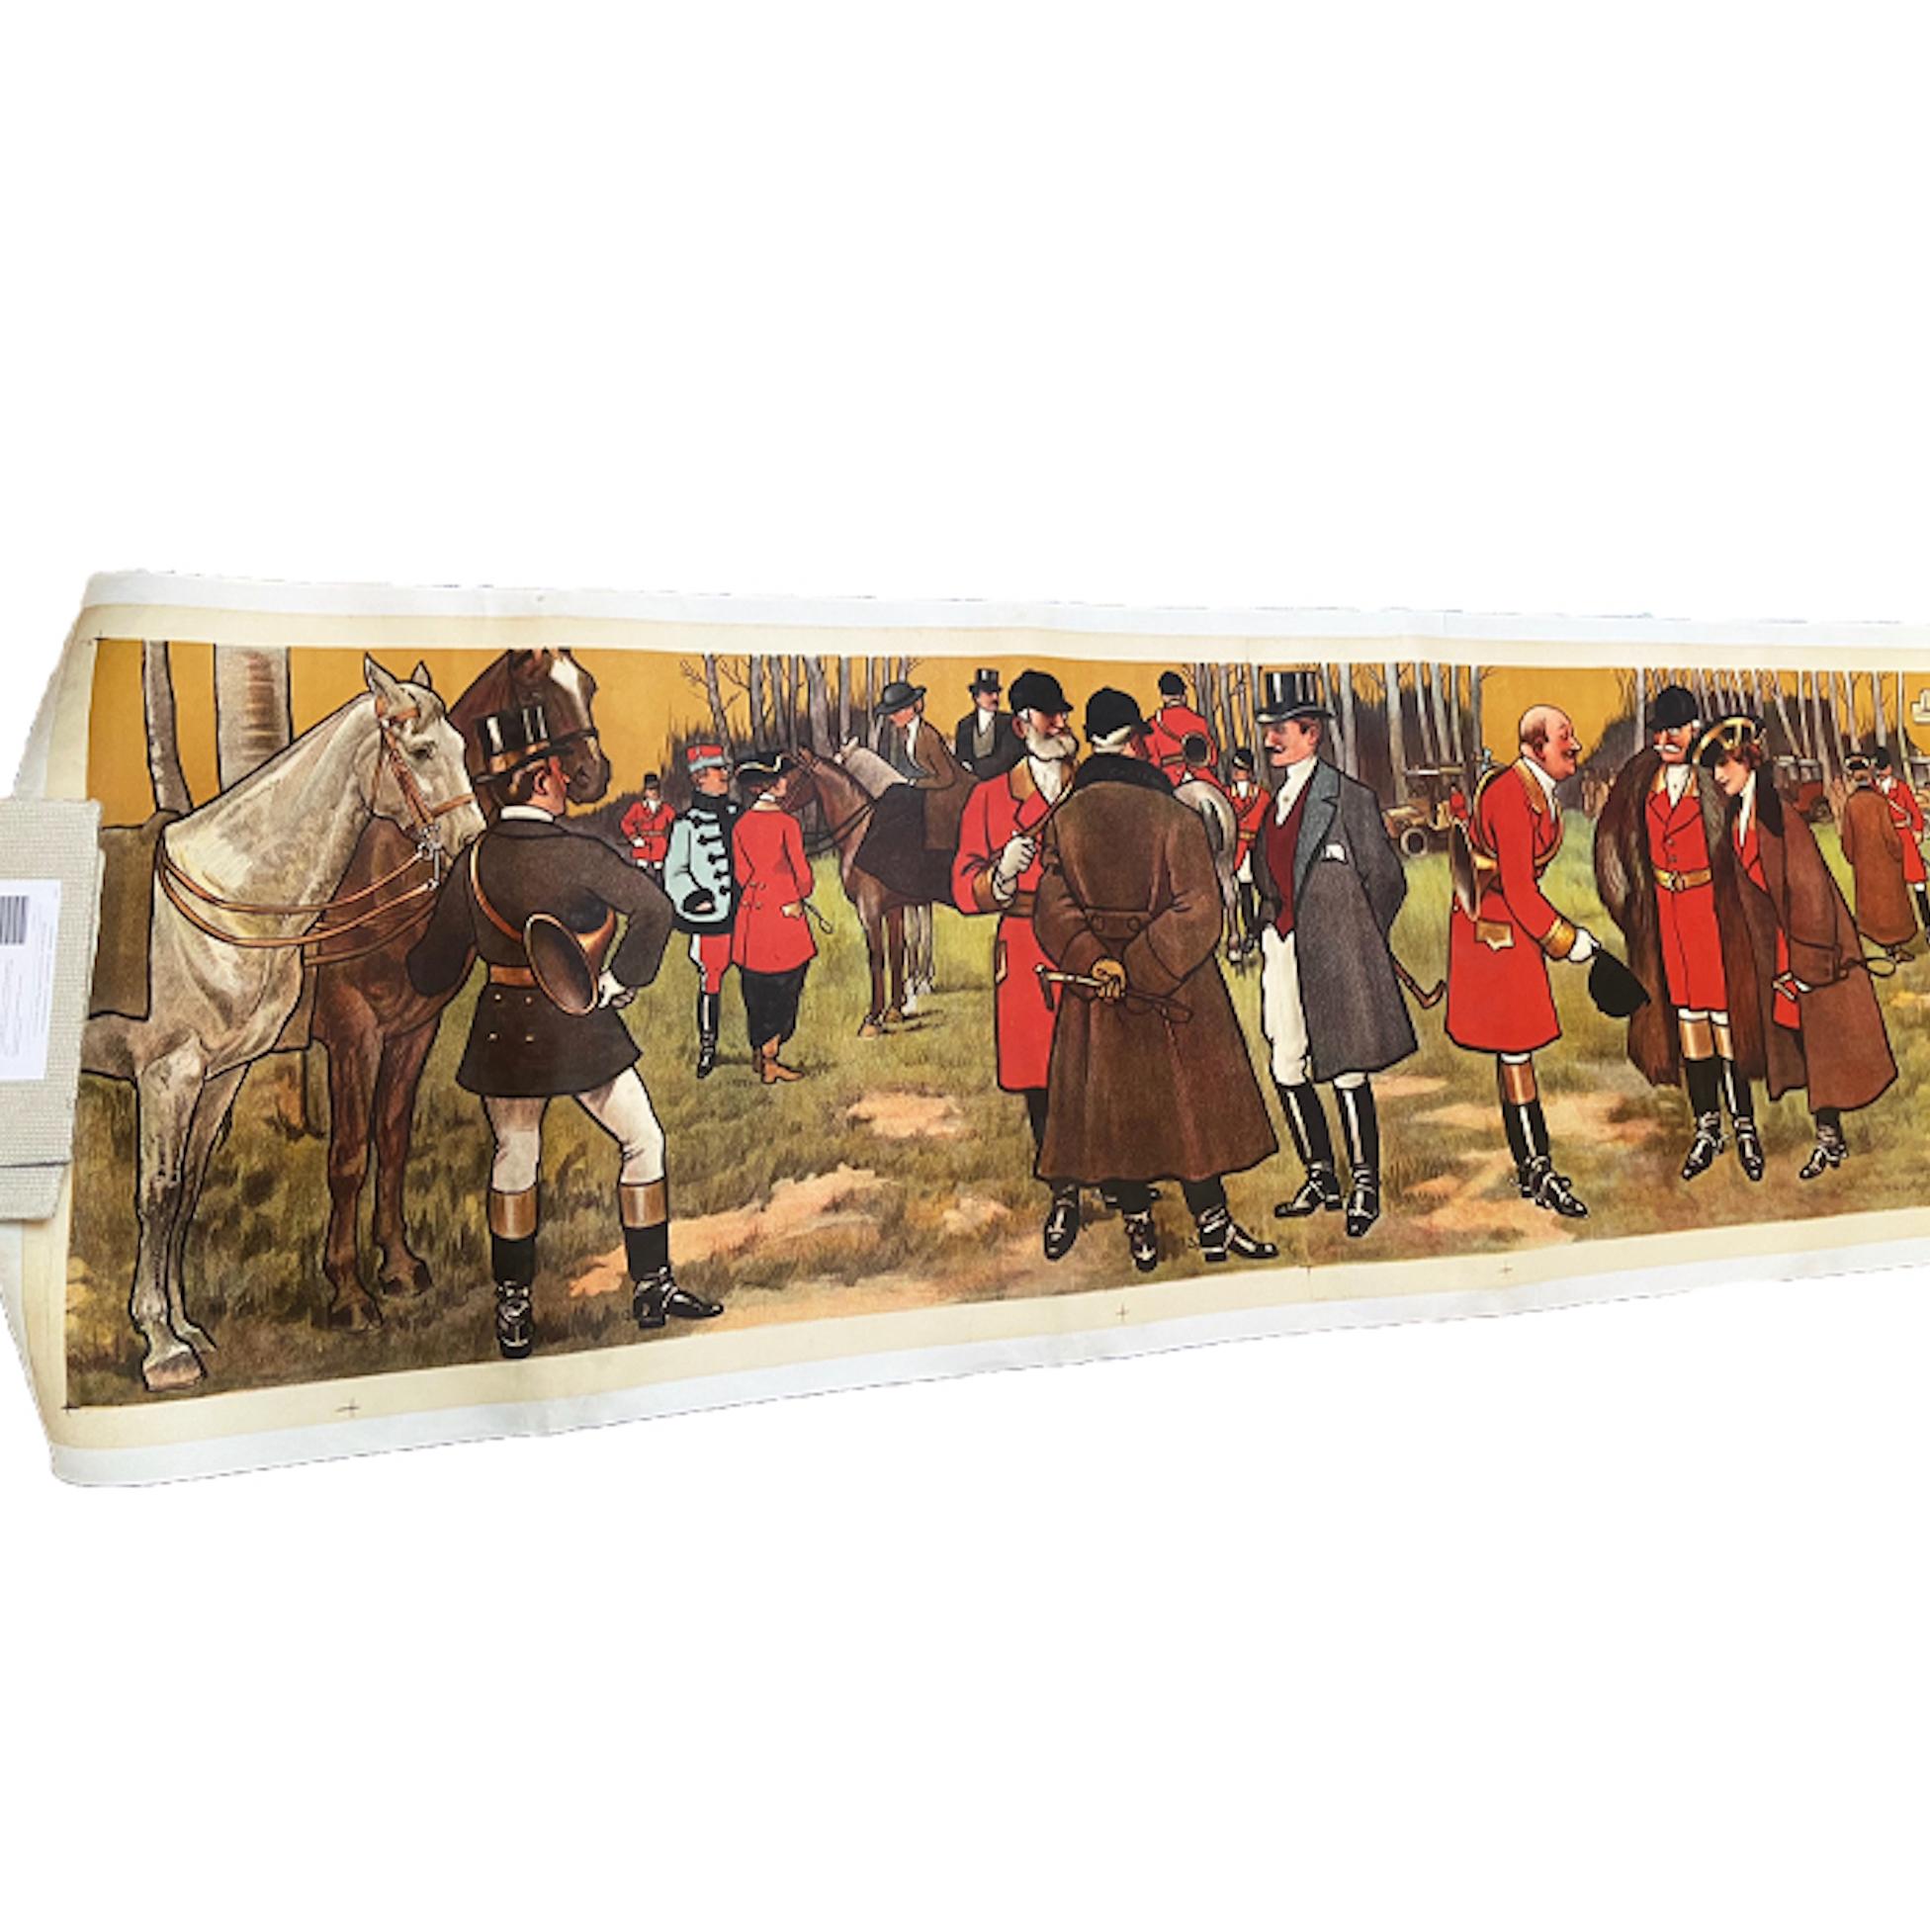 Painting size: 135? x 23.5?
Portrait size: 137? x 26?
Complete size: 139? x 28?

Albert Guillaume was a talented artist and poster designer who created this image as part of a series of decorative panels to depict scenes at a hunt in the fields.